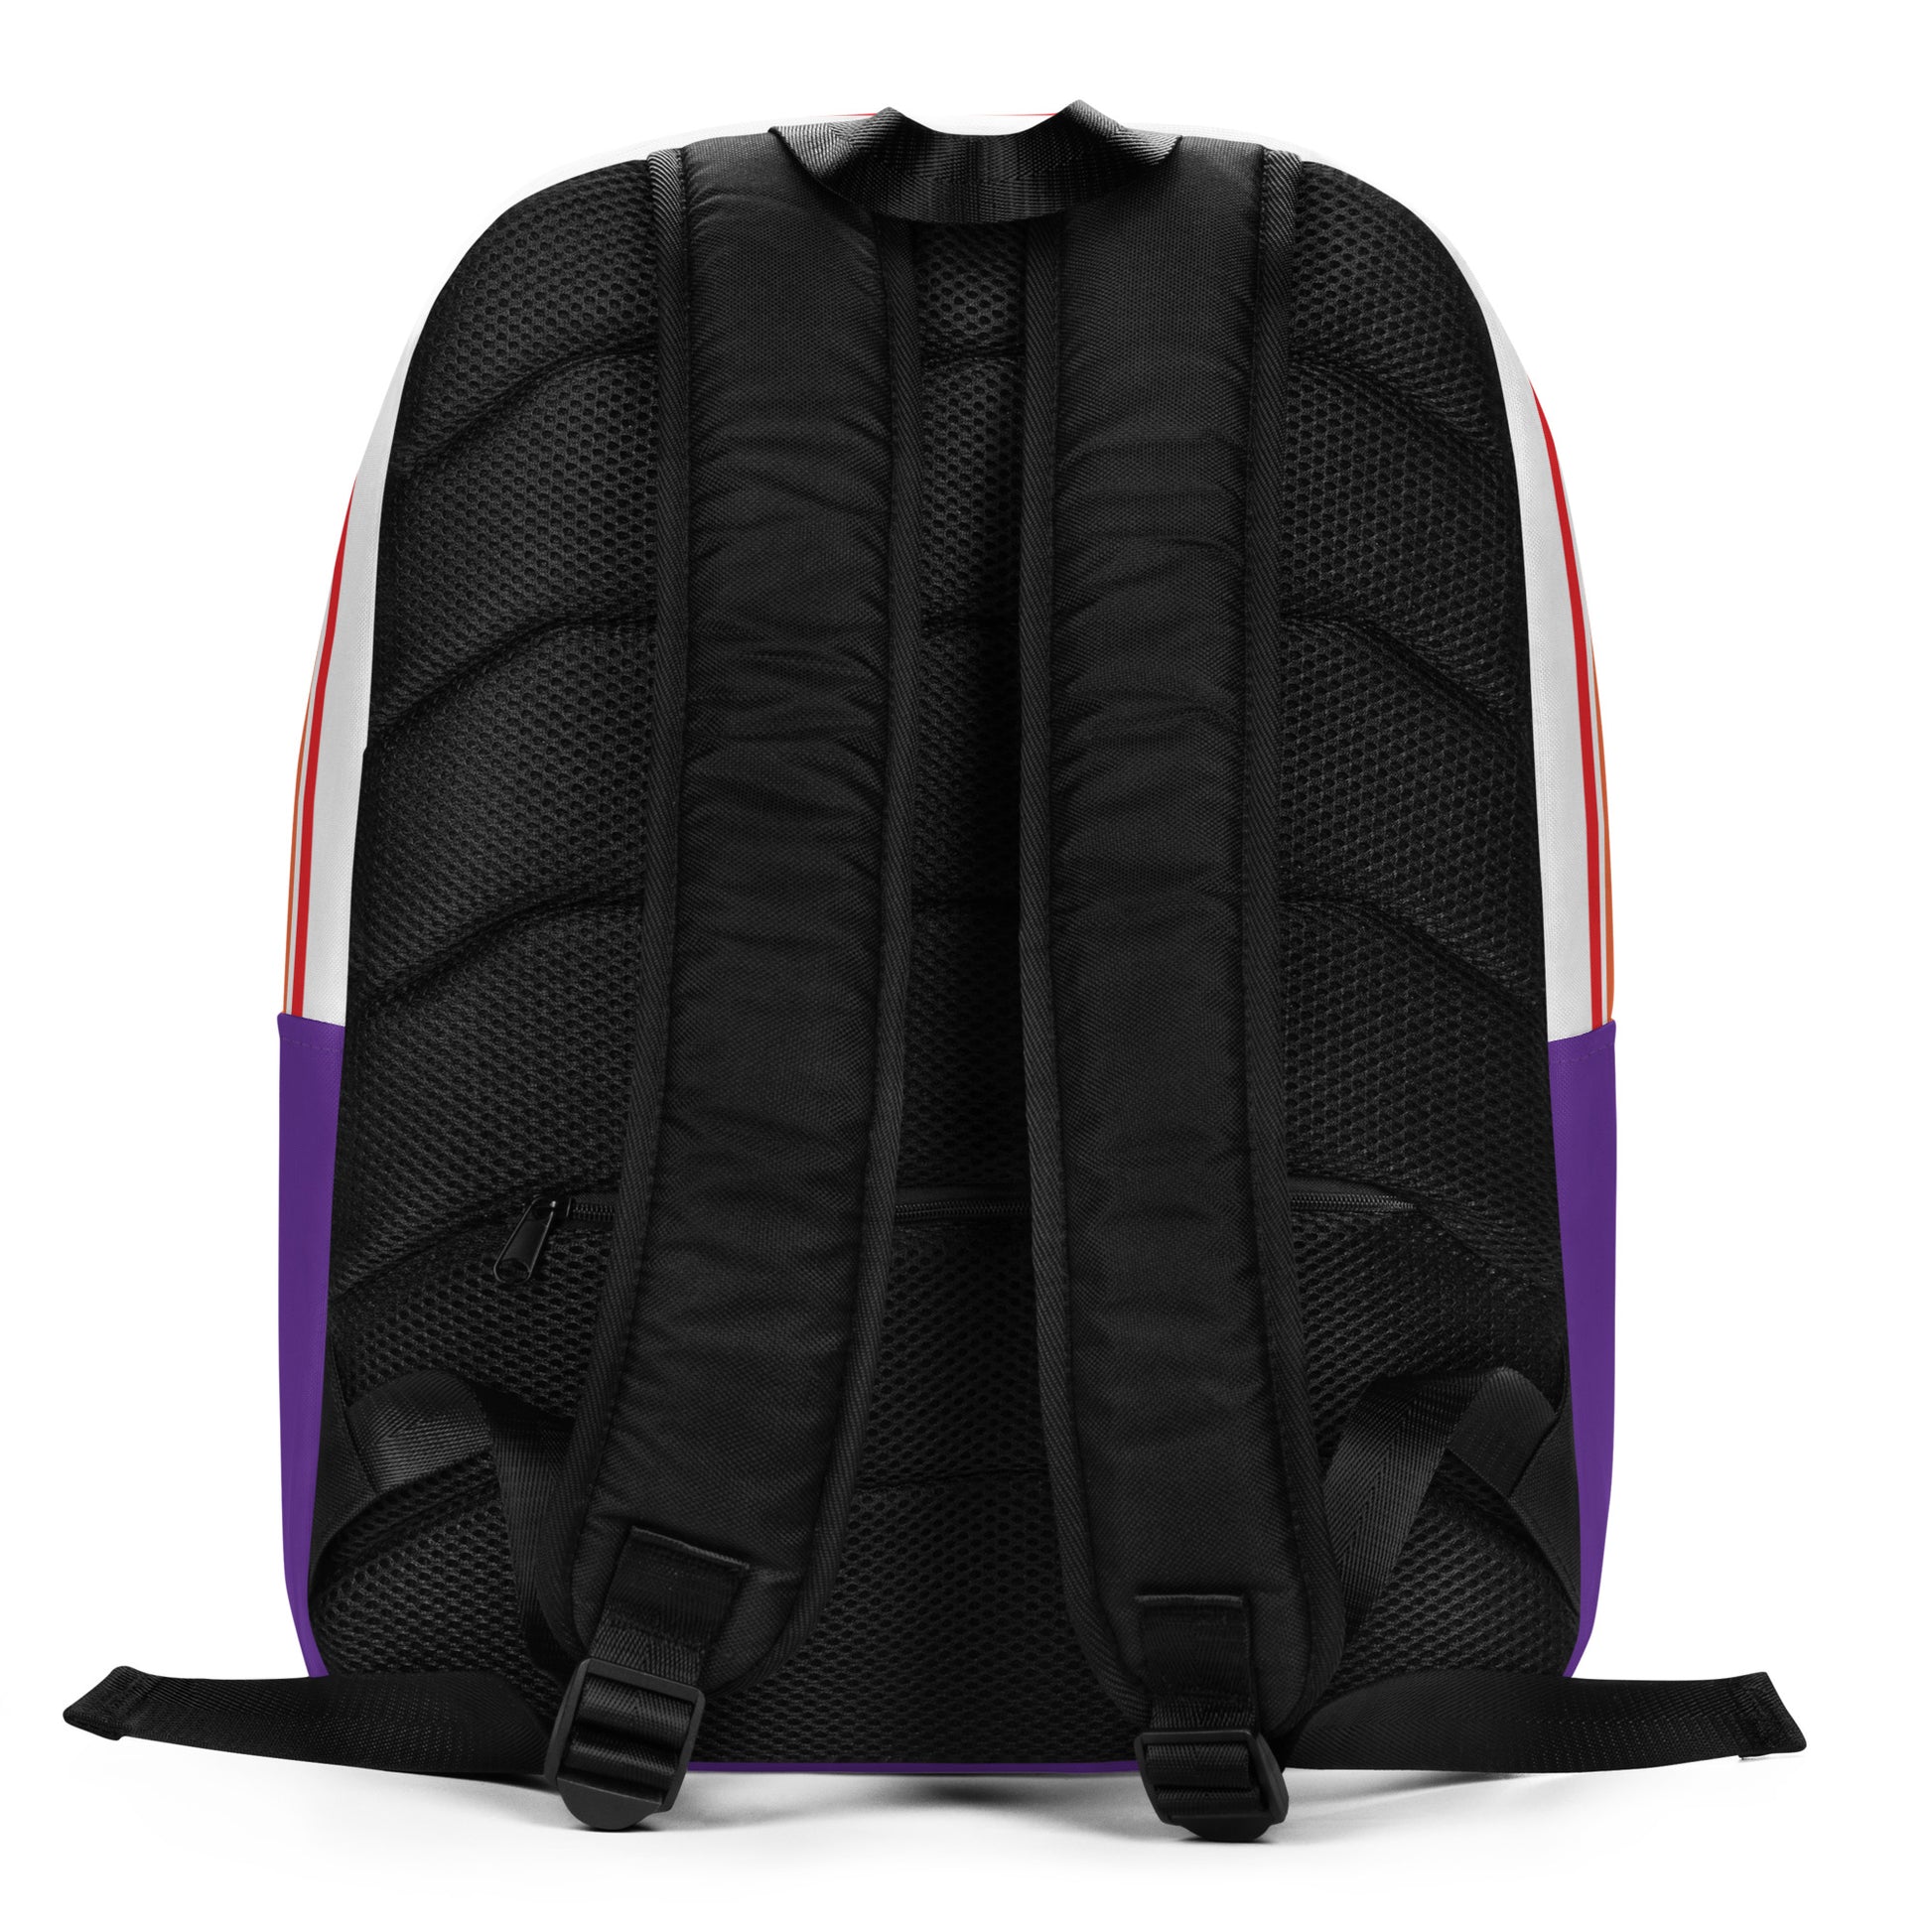 Large Monster White Minimalist Backpack purple base no pocket rainbow striped top  black rear and straps